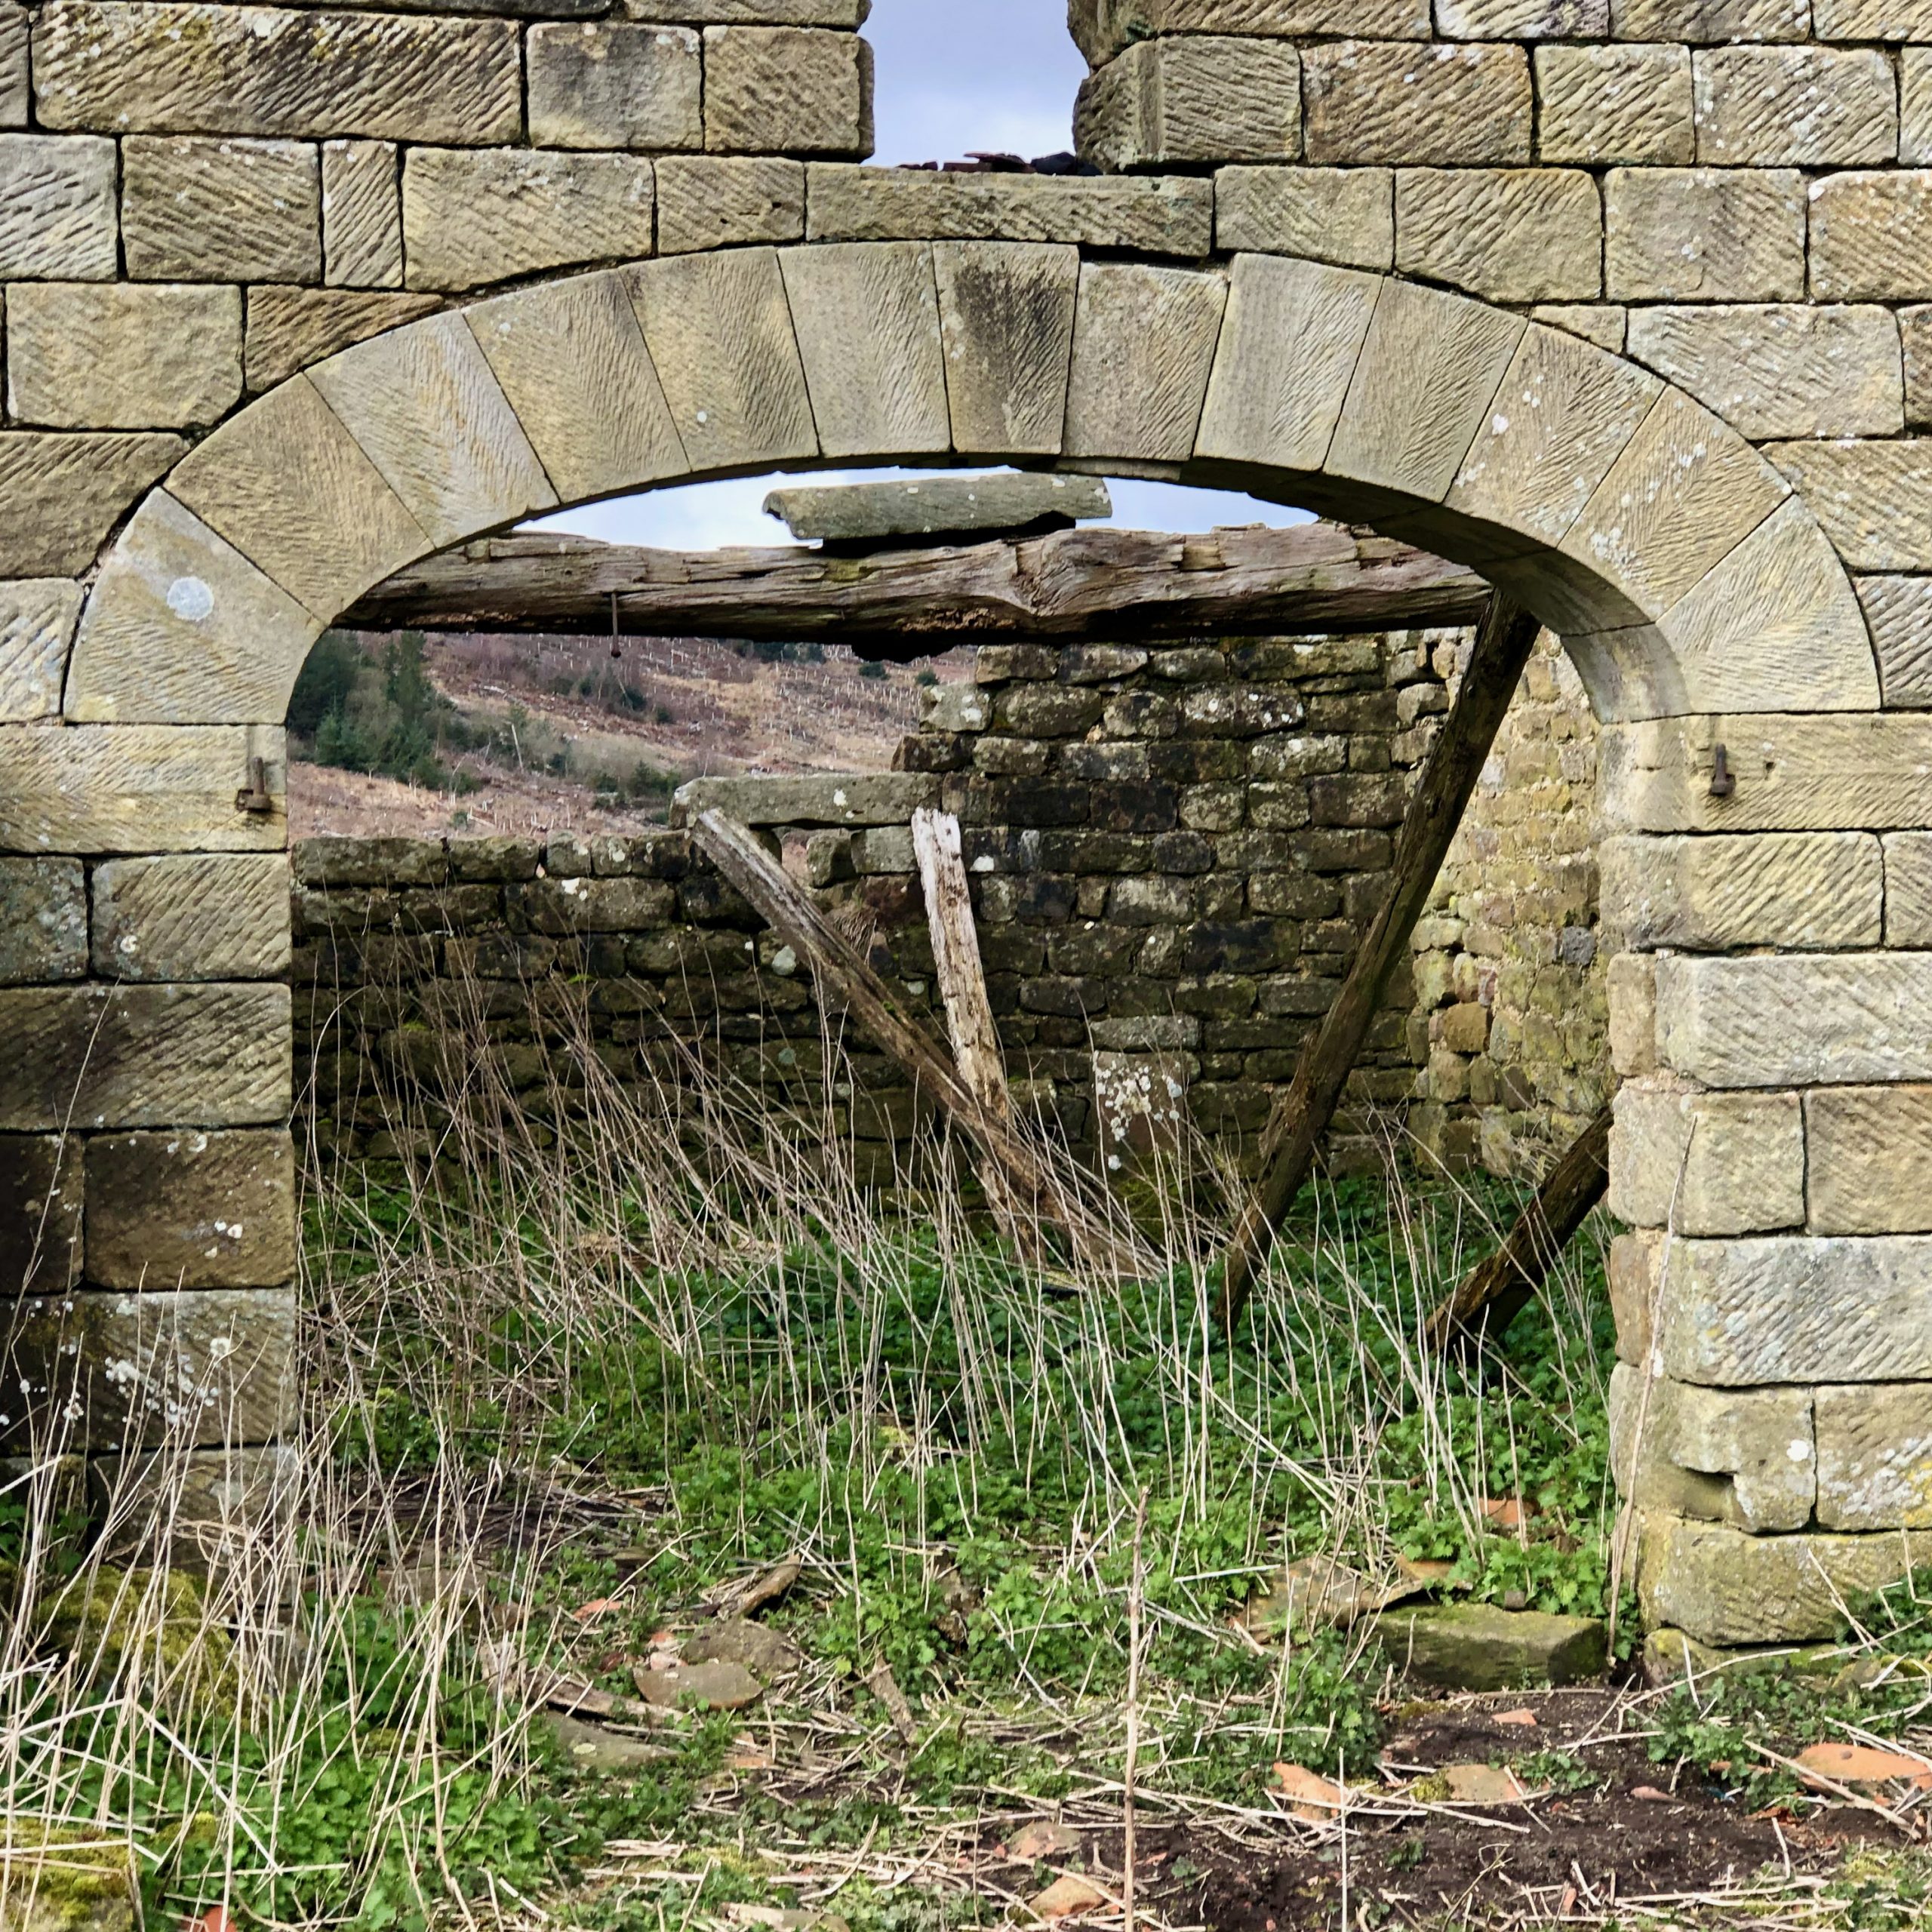 Detail of the three-centred arch in the ruined sandstone barn of Stork House. One of the voussoirs of the arch has slipped putting the whole arch in danger of collapse.